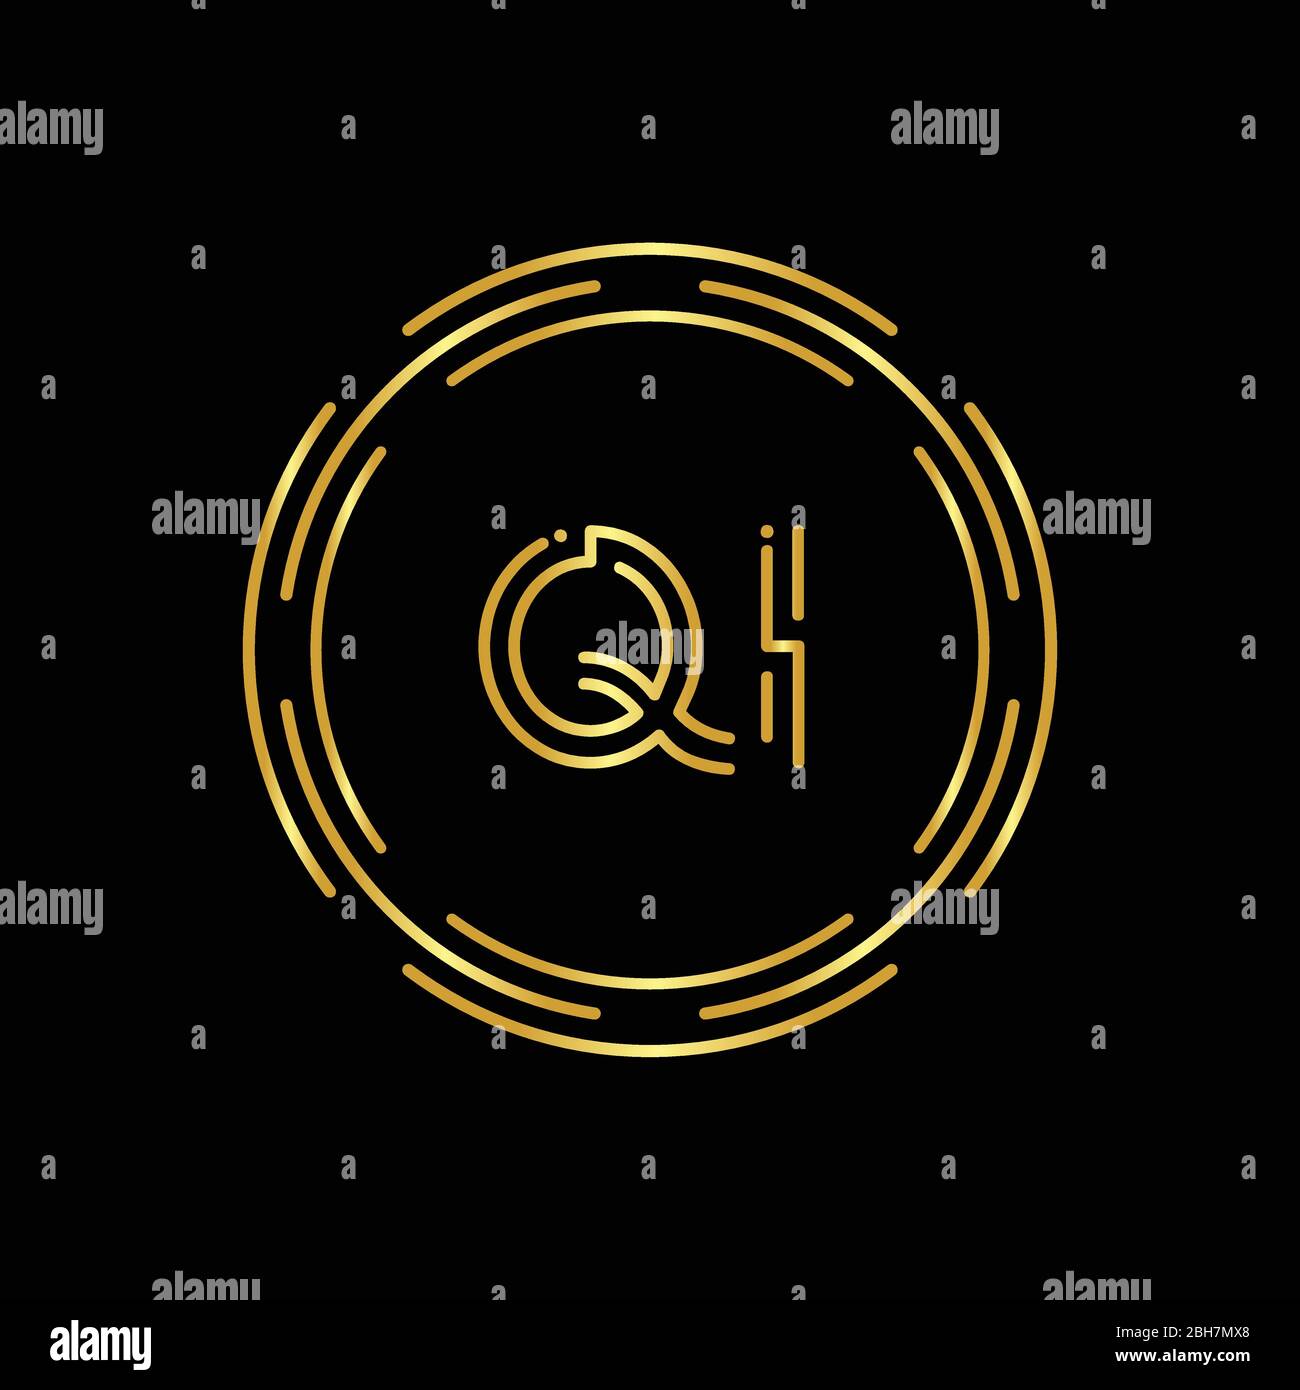 Initial Letter QI Logo Design Vector Template. Digital Abstract Circle ...